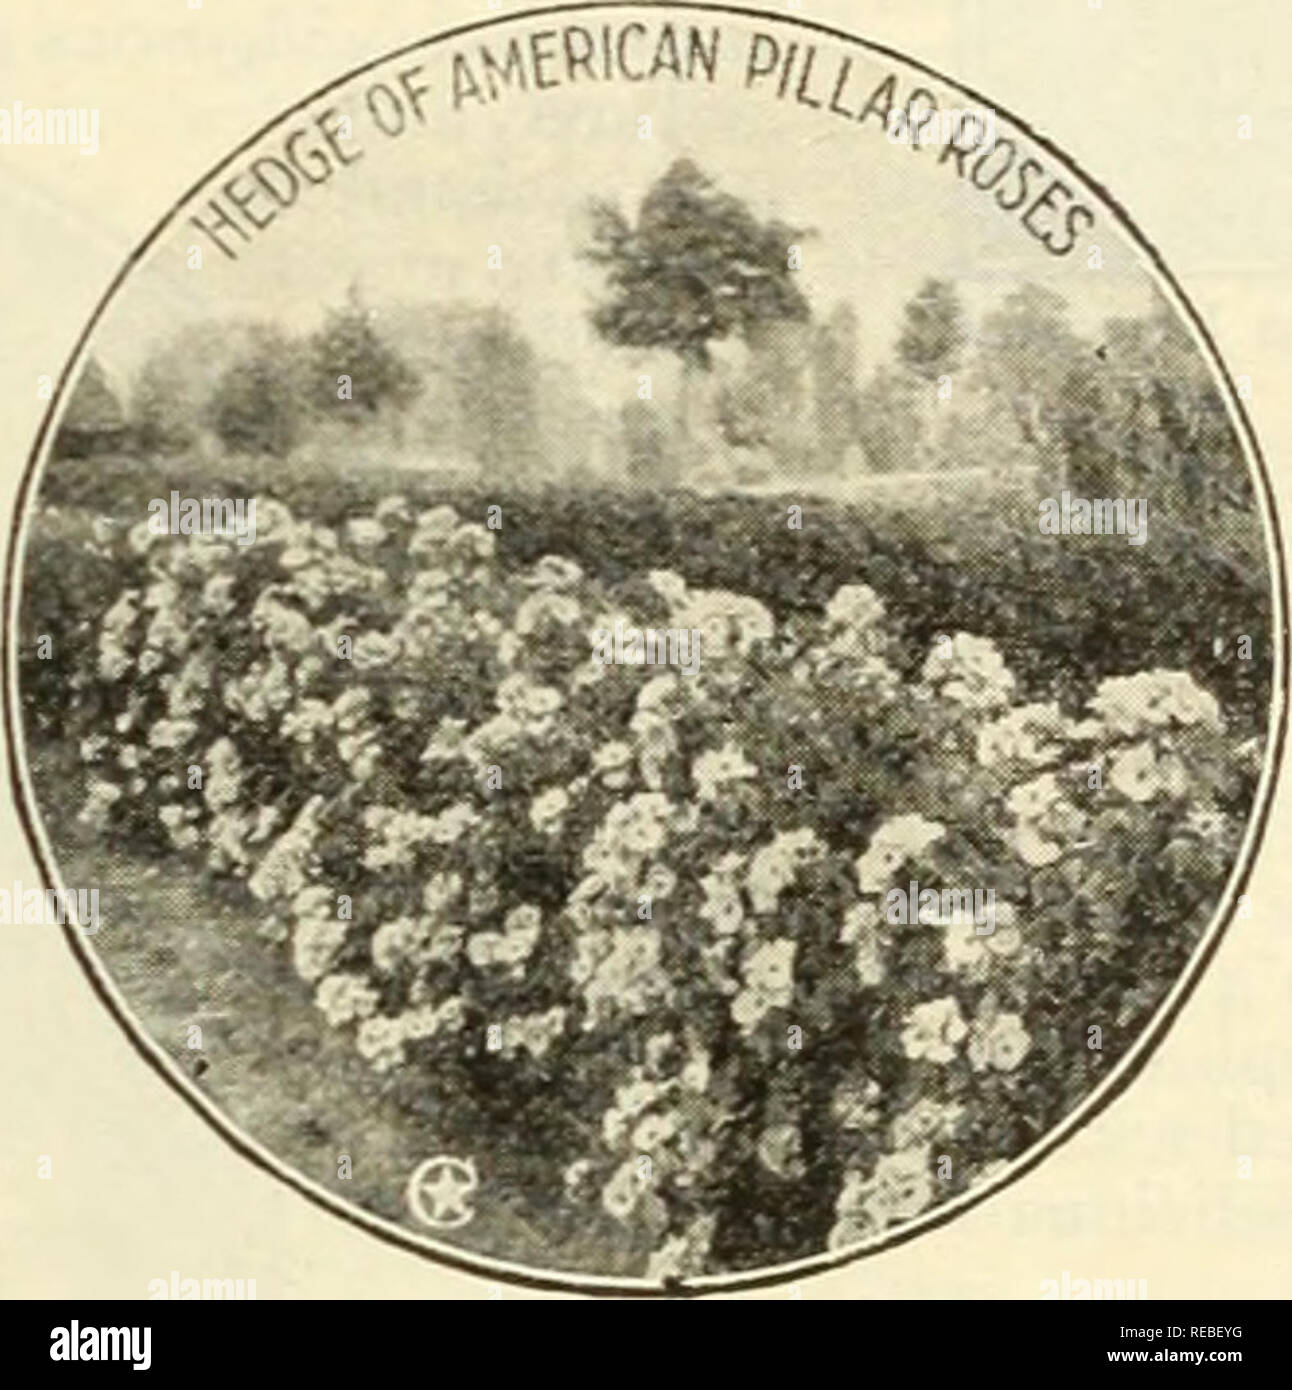 . The Conard &amp; Jones Co. roses. Rose culture; Roses; Fruit Seeds Catalogs; Plants, Ornamental Seeds Catalogs. MULTIFLORA OR CLUSTER-FLOWERED TYPES â¢AMERICAN PILLAR Introduced by the Conard &amp; Jones Co. Decided, 1918, by a vote of The National Rose Society of England as the &quot; Most Popular Climbing Rose in Existence.&quot; If ever there was a Rose constituted to stand the tryingconditionsof our Ameri- can cHniate, we have it in this unique, hardy, free-blooming climber. It will thriv^e in poor soil as well as in rich, and insists on growing vigorously. It has stout, thick, curs'ing  Stock Photo